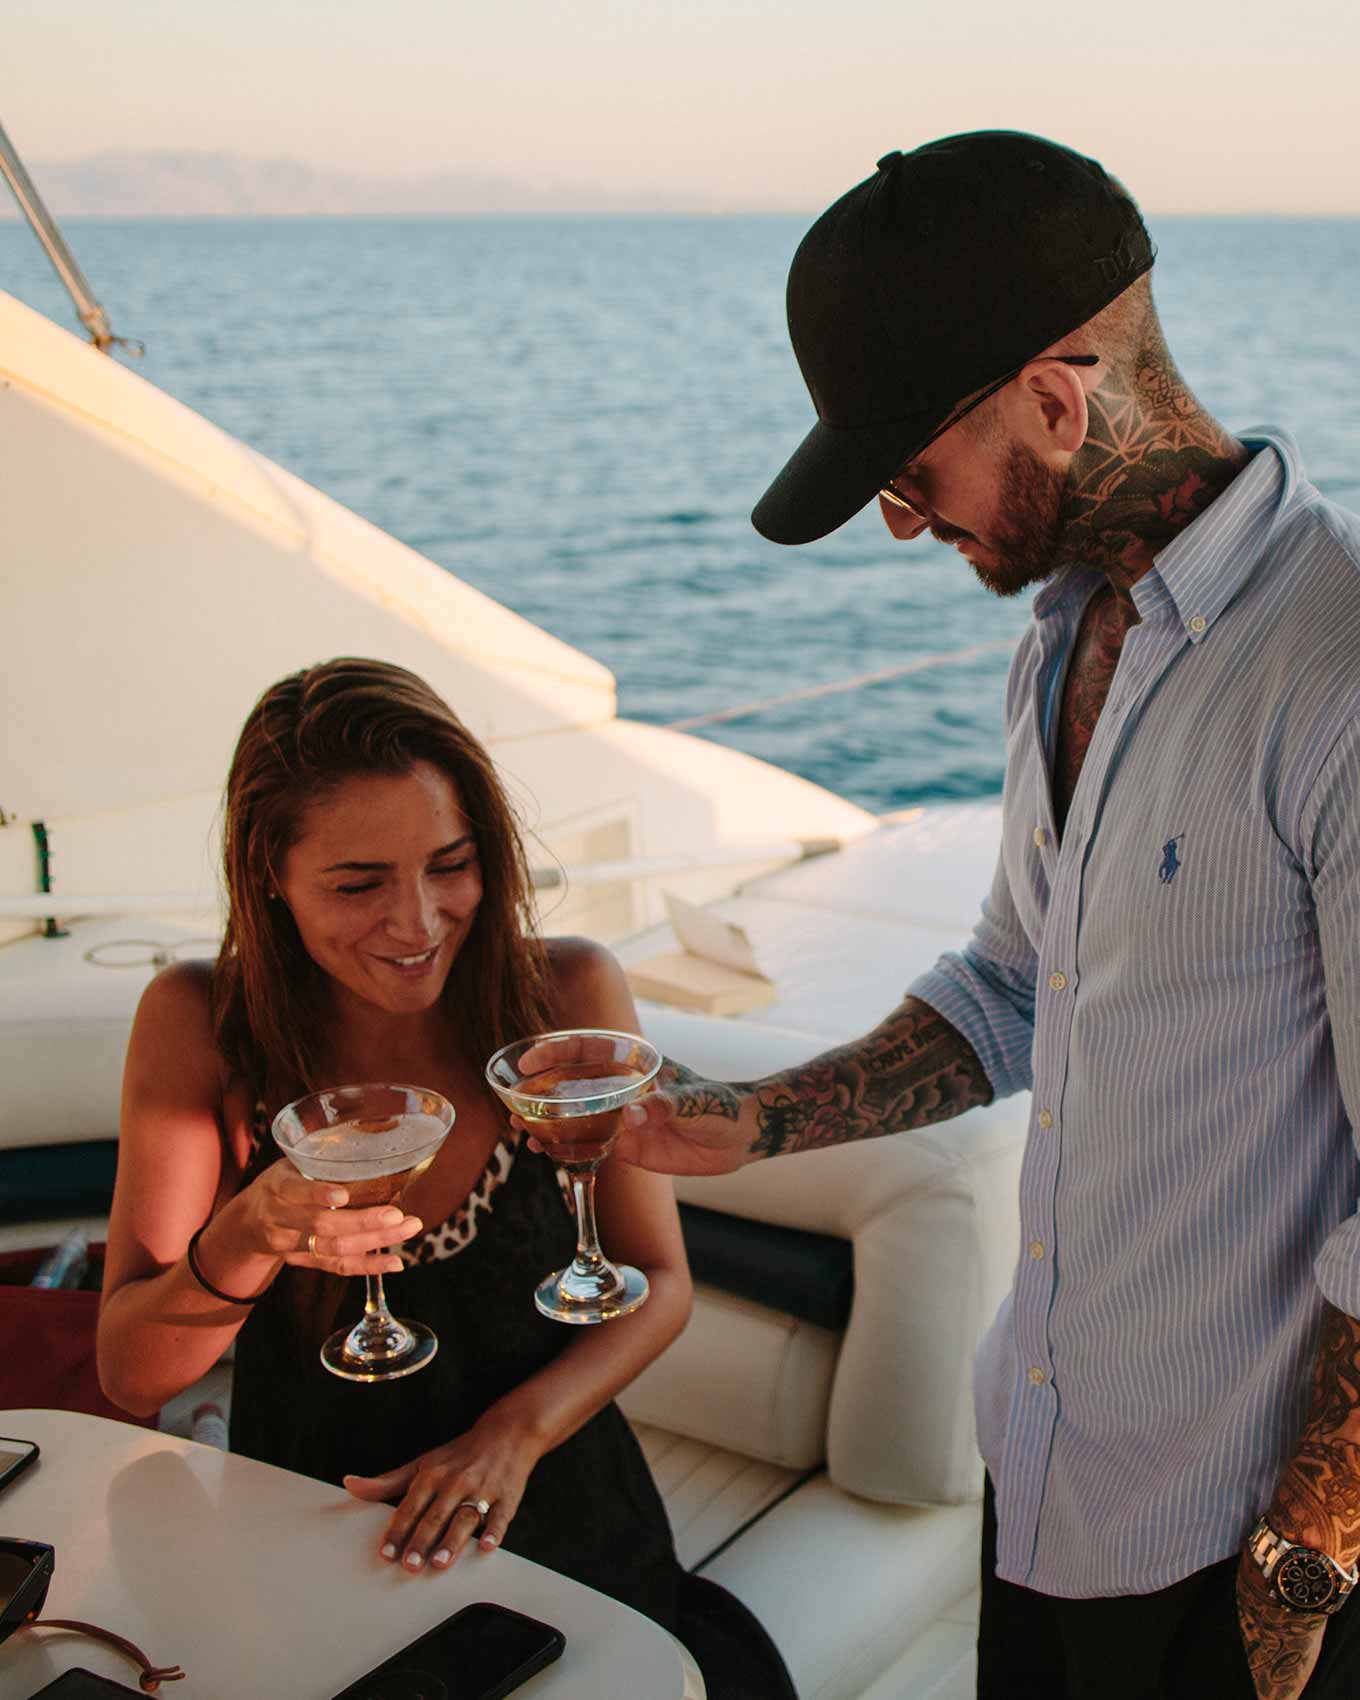 apero on a private yacht